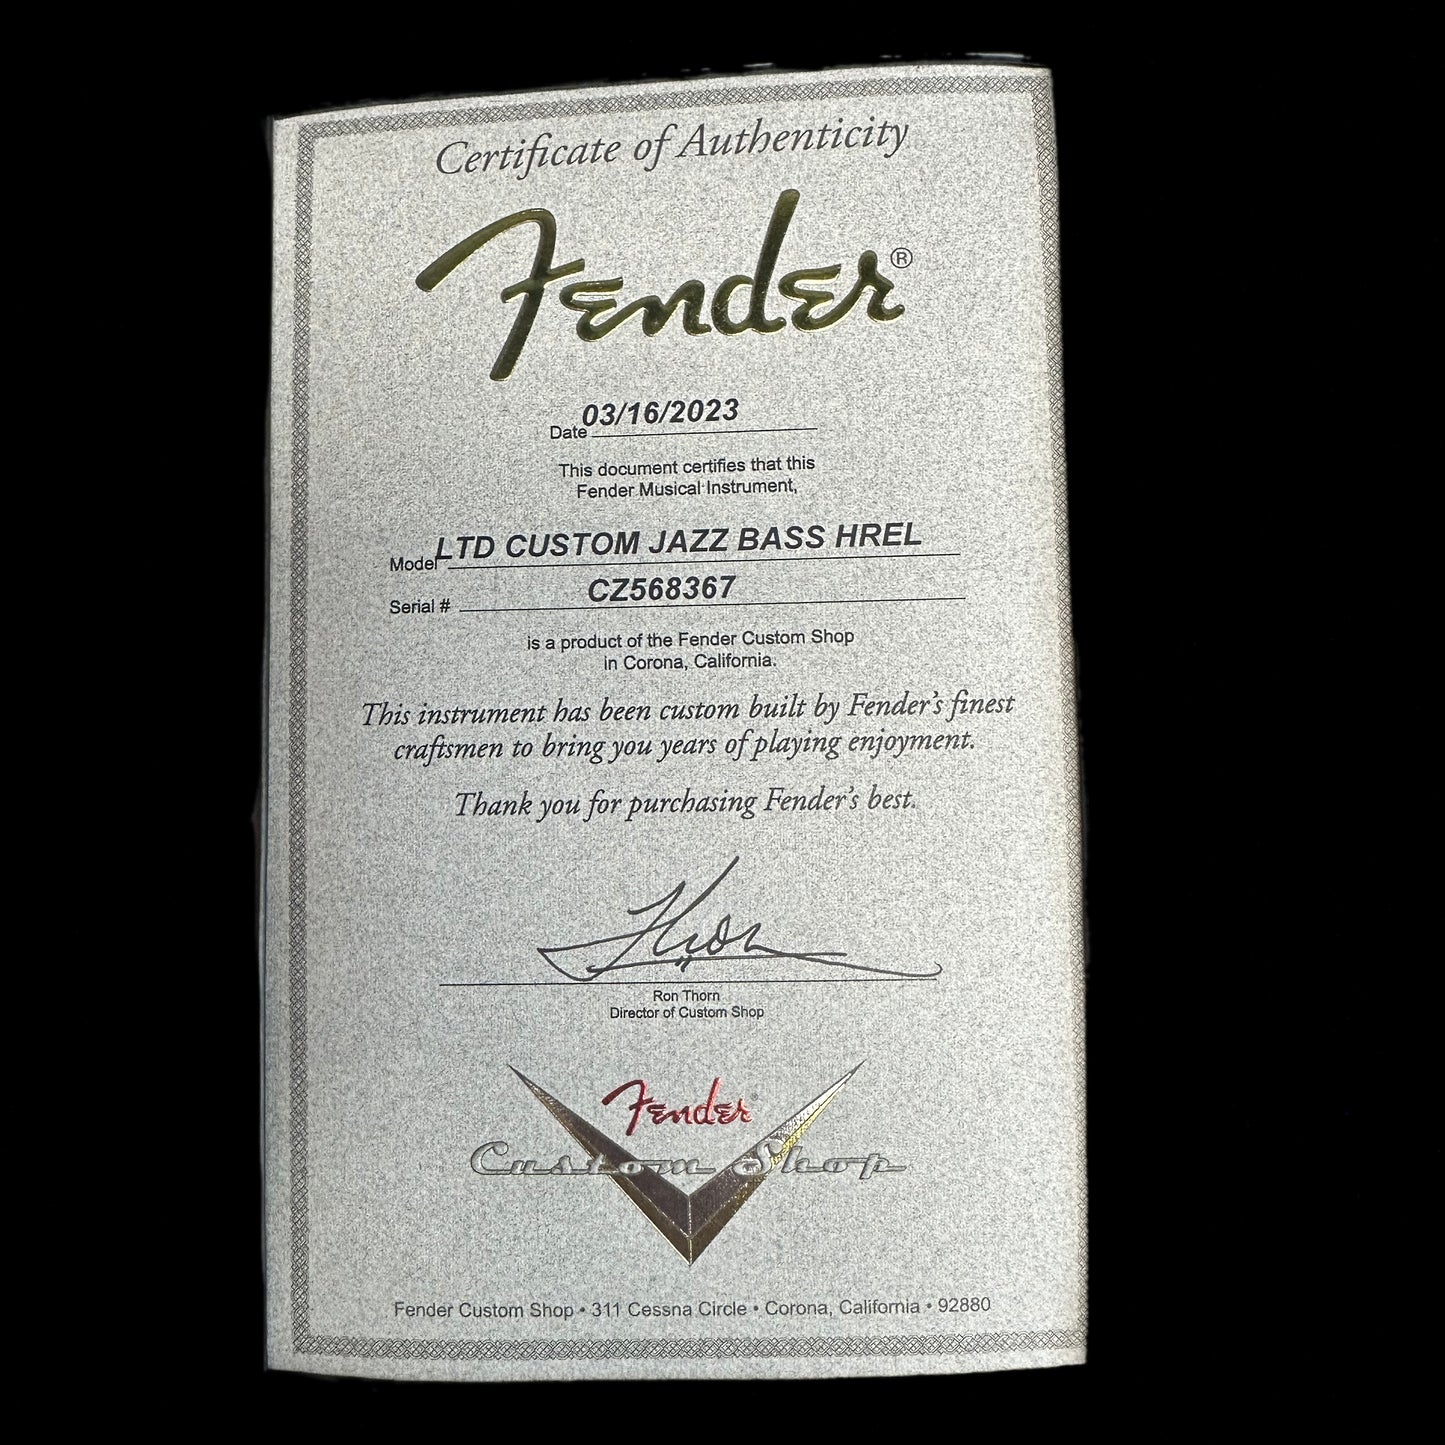 Fender Custom Shop Limited Edition Custom Jazz Bass Heavy Relic Aged Black Certificate of Authenticity.